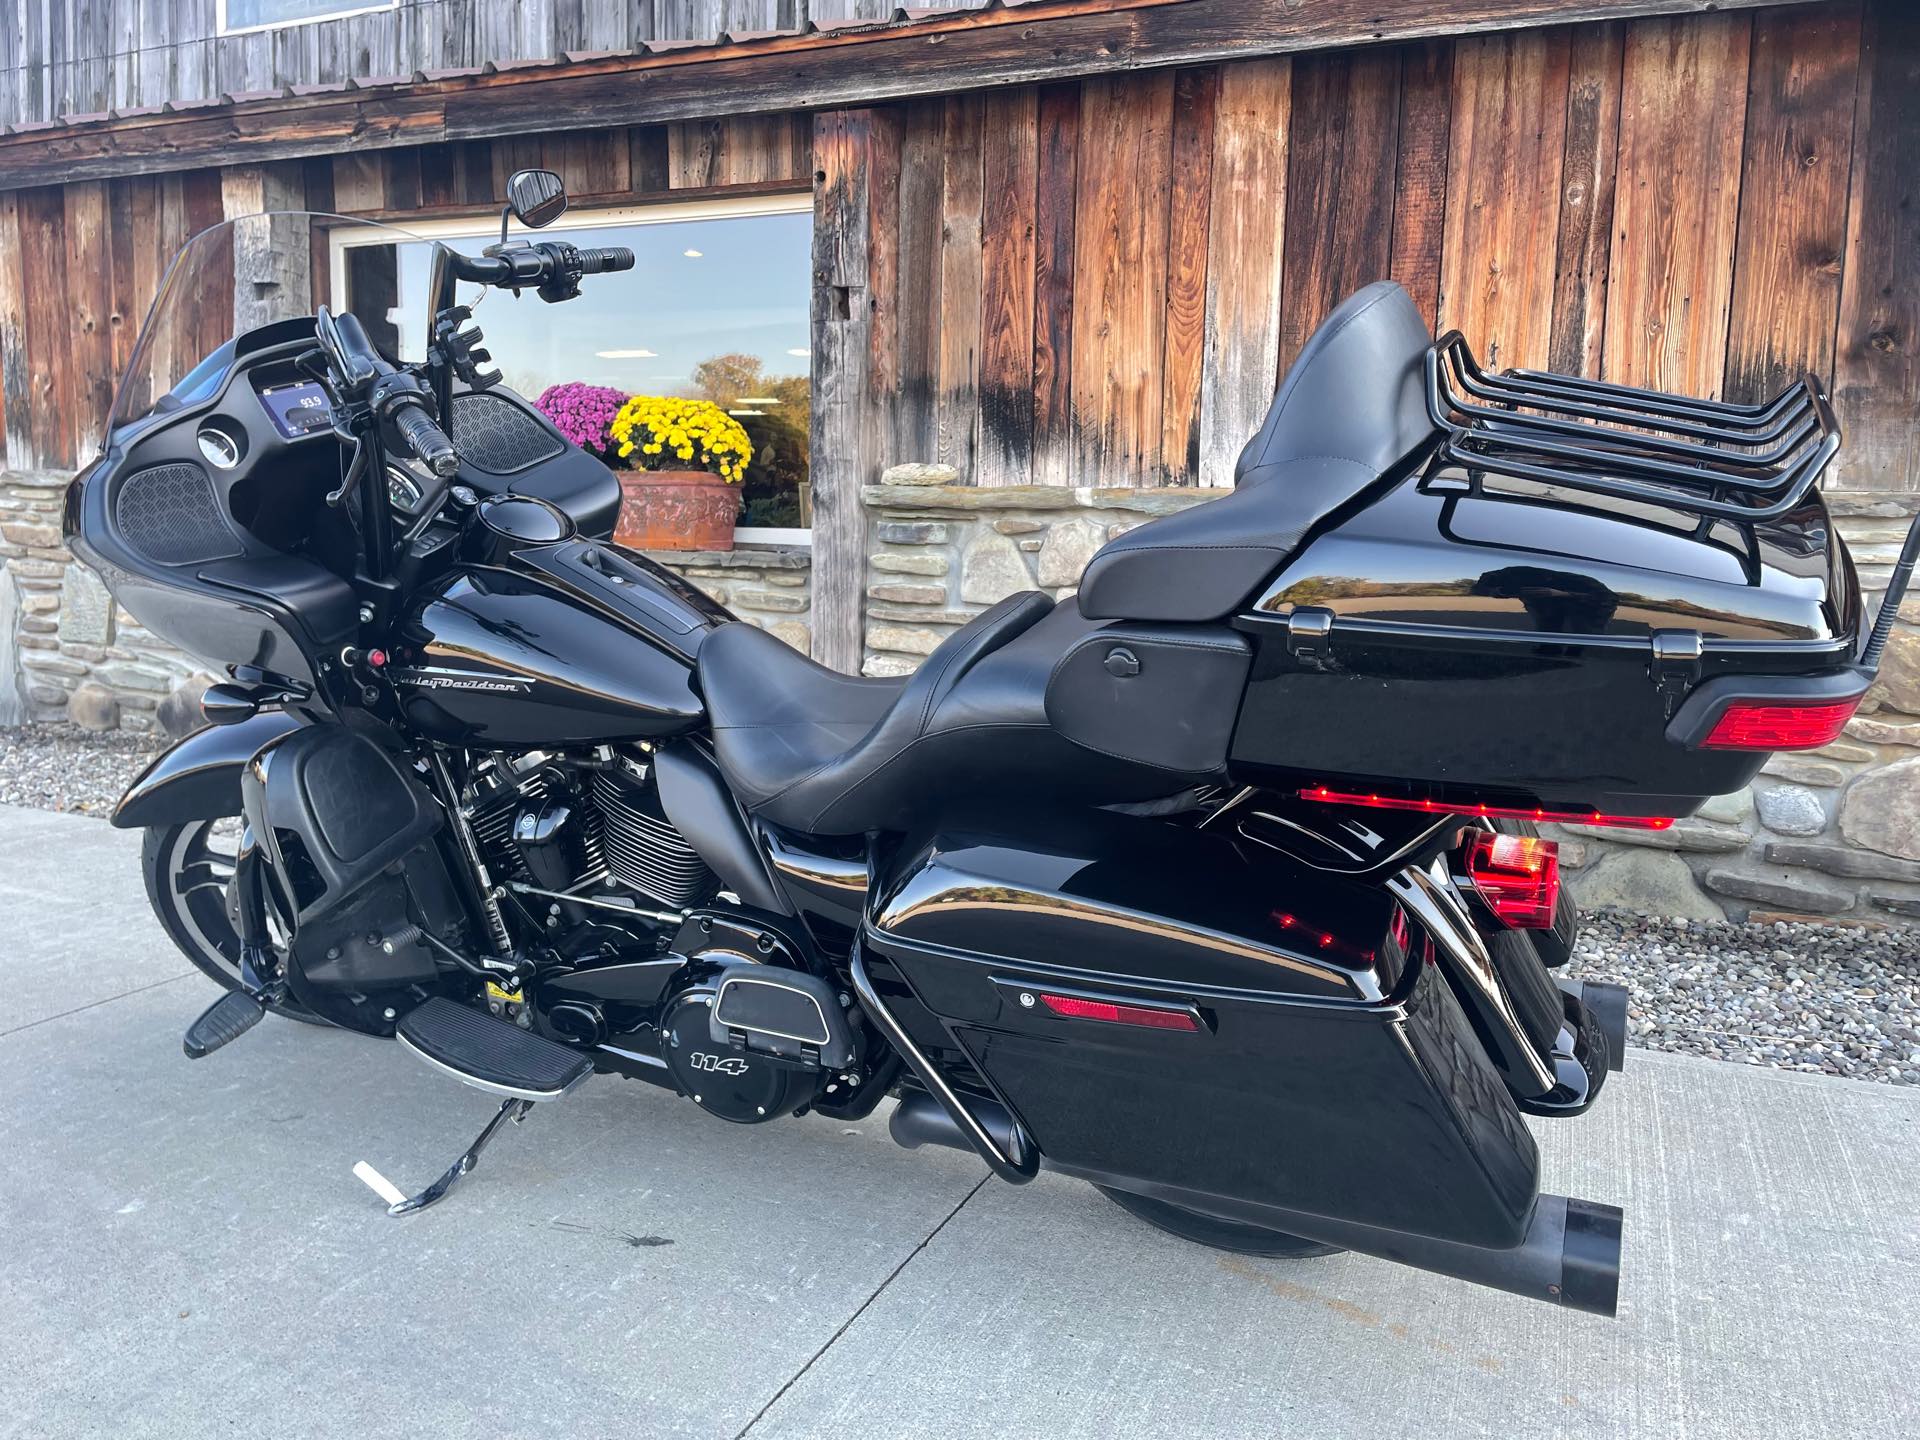 2019 Harley-Davidson Road Glide Ultra at Arkport Cycles